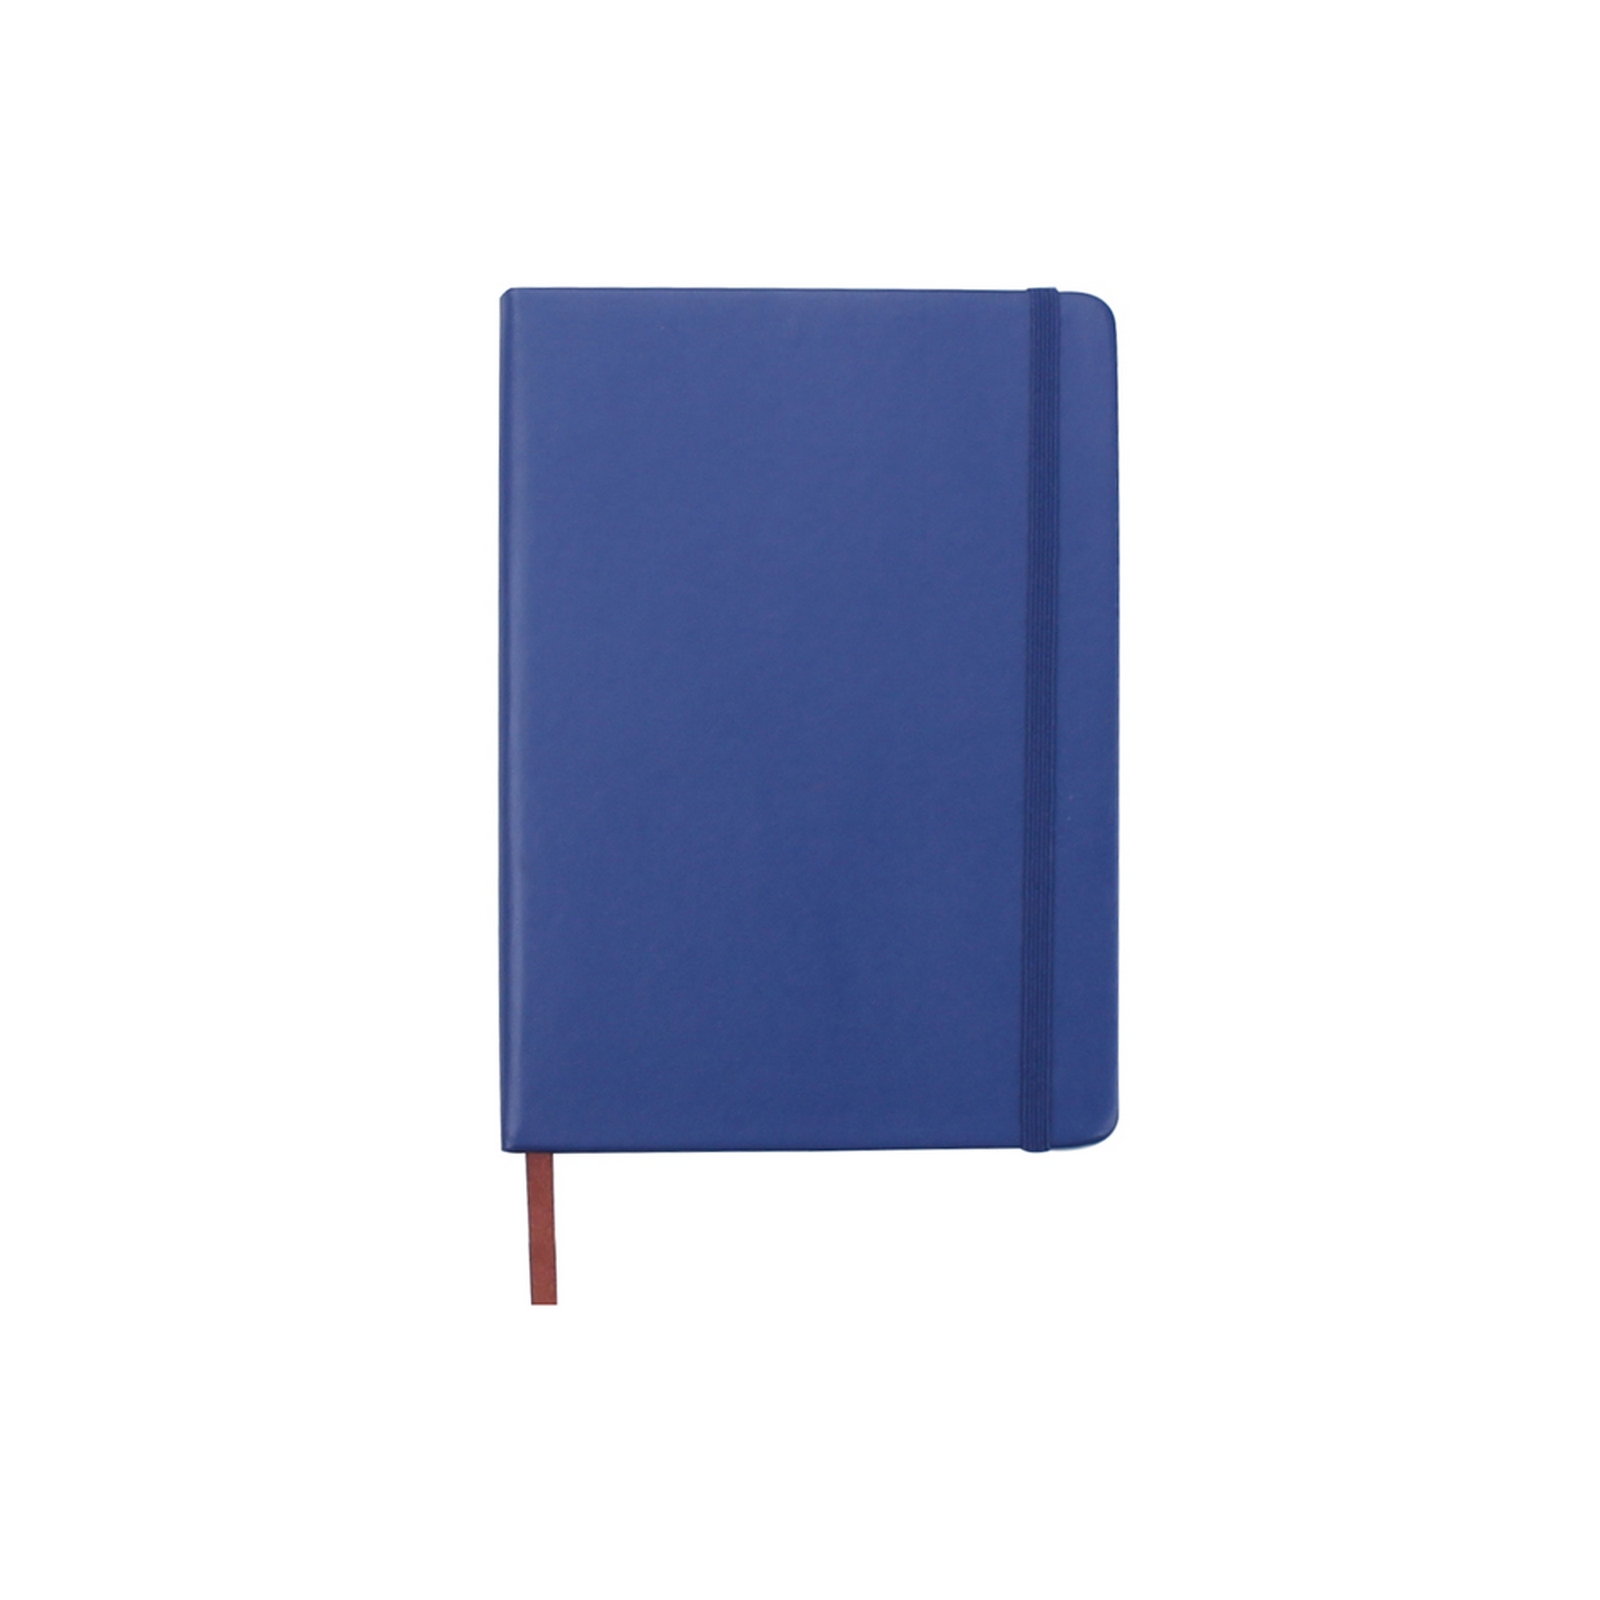 Colored Notebook with Hard Cover